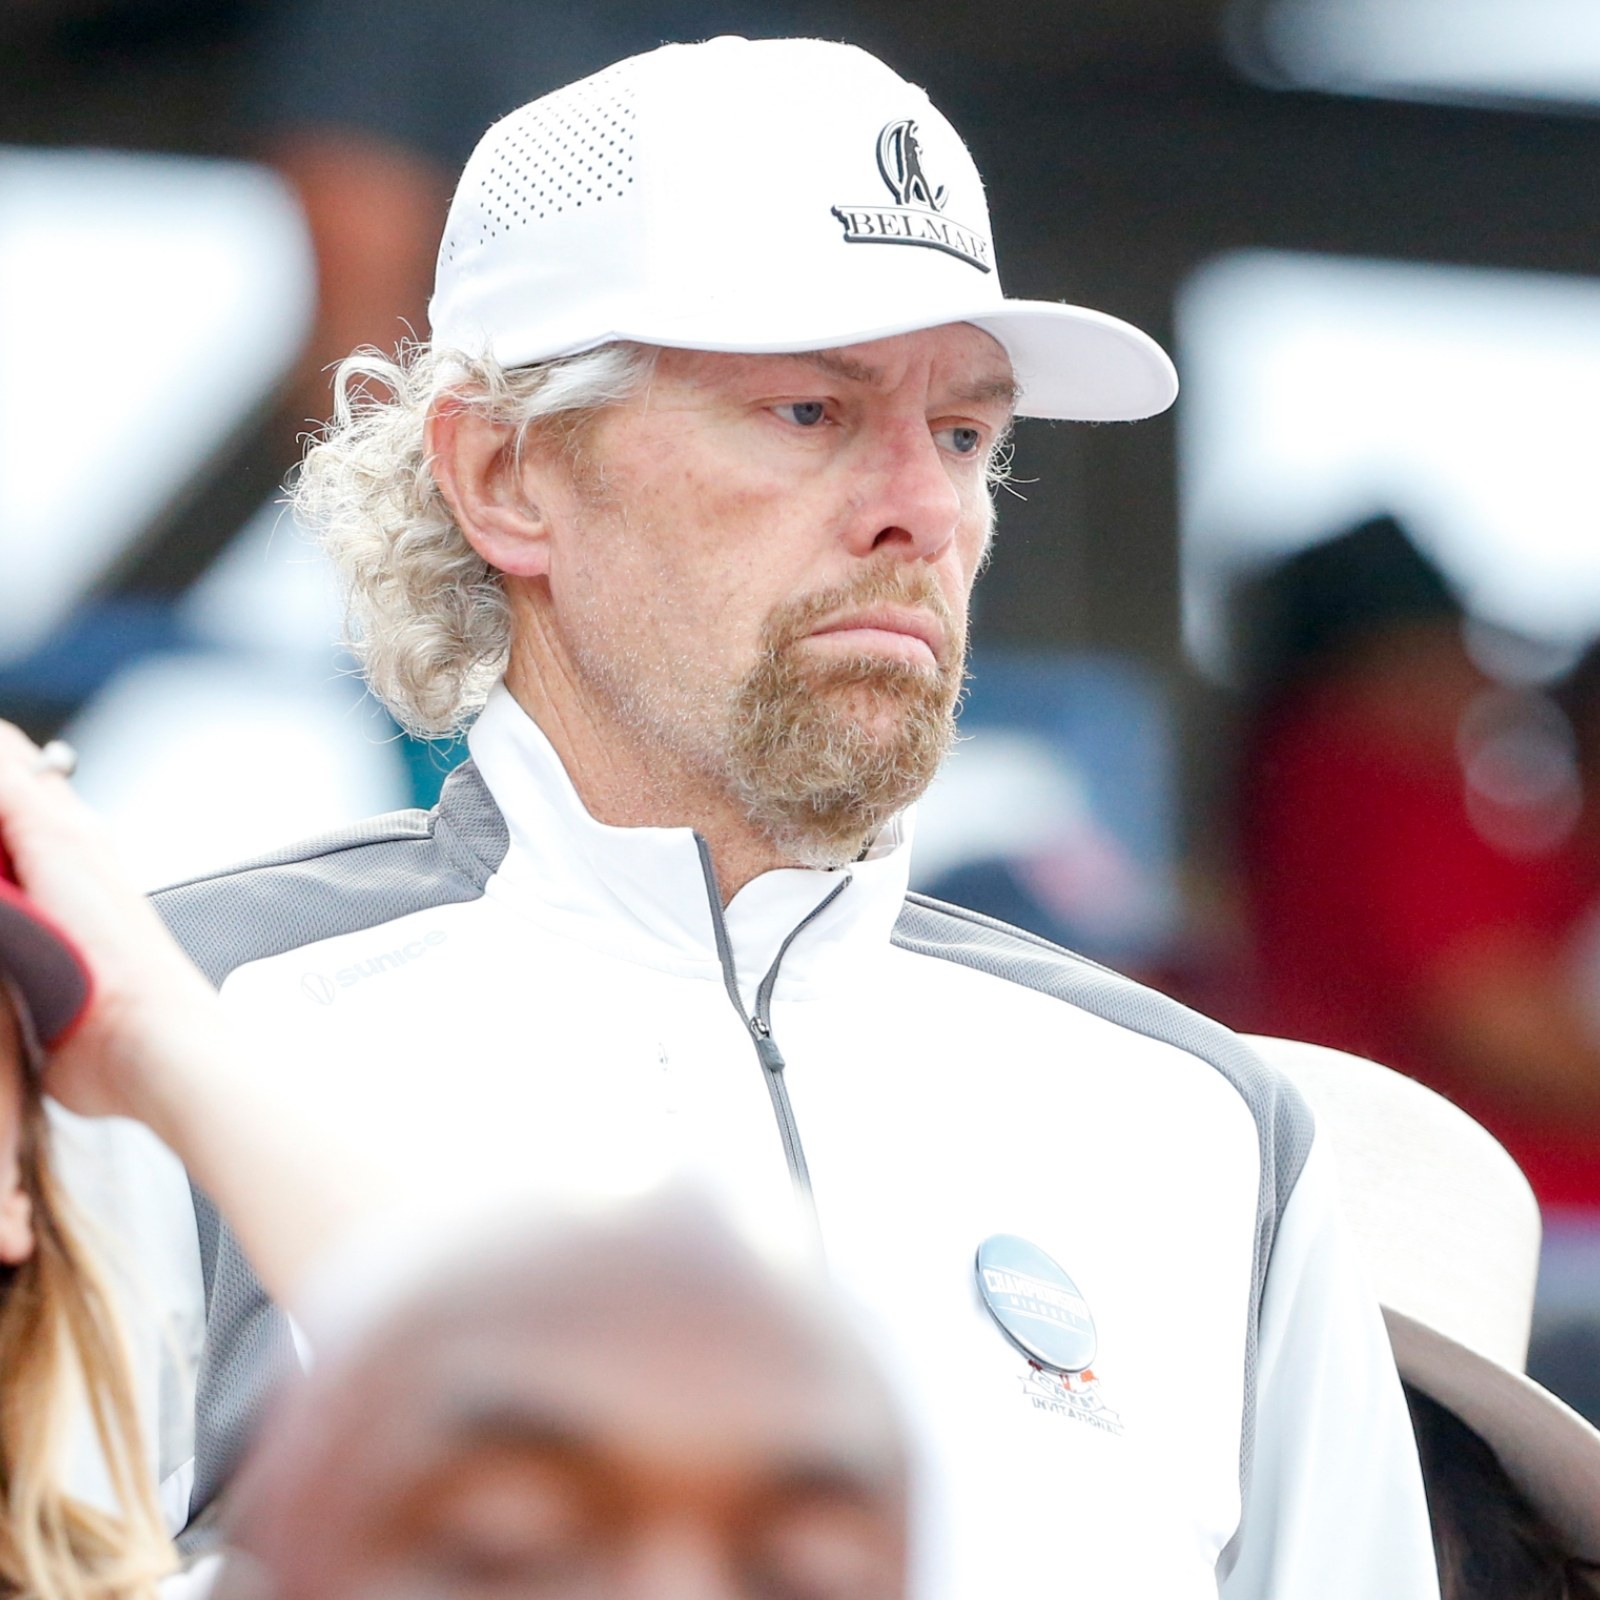 Here are 10 things to know about 'The Angry American' Toby Keith